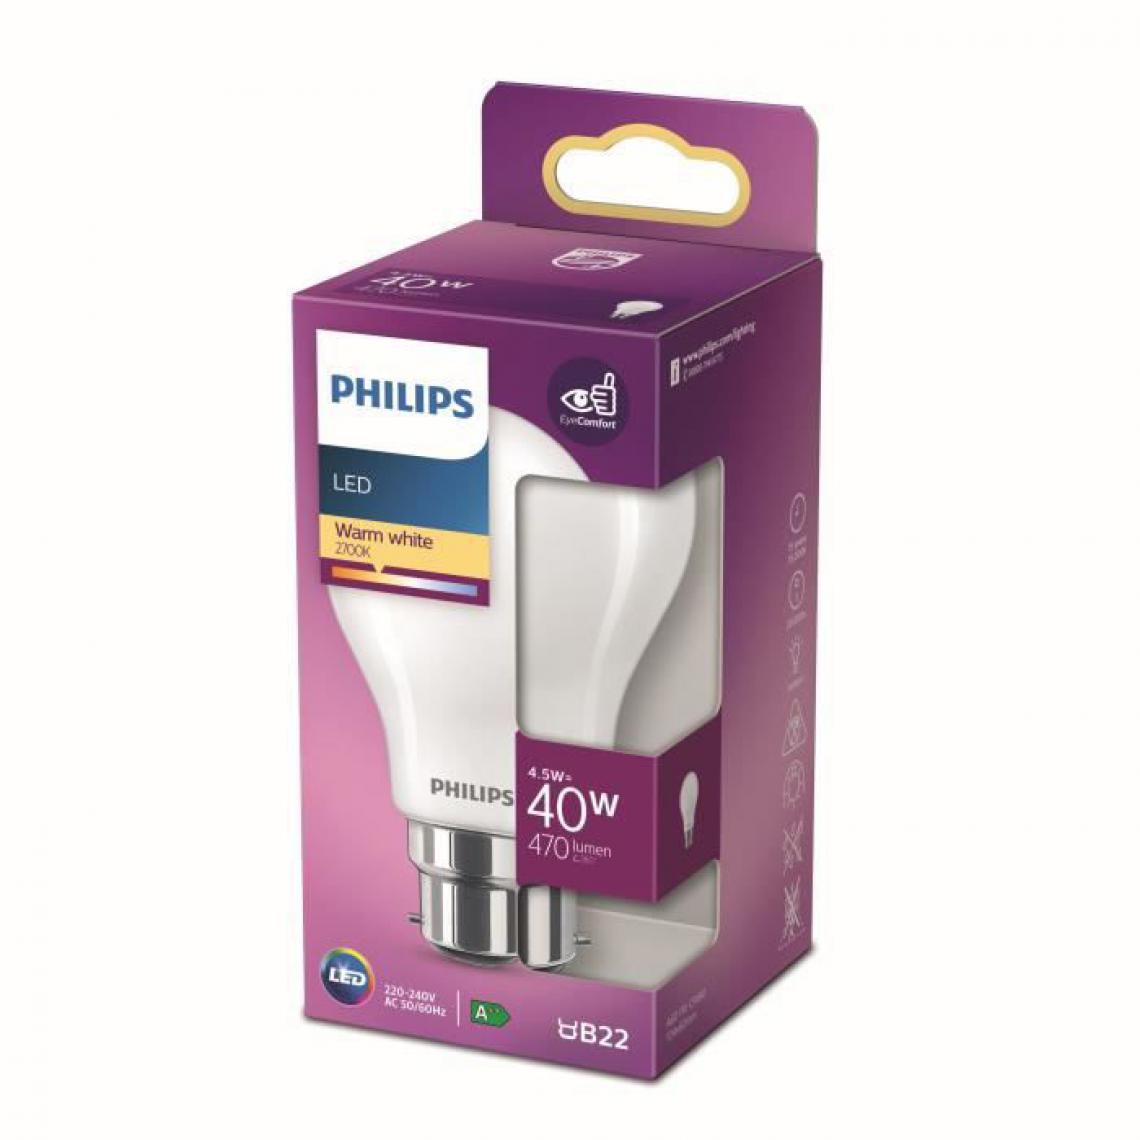 Philips - Philips ampoule LED Equivalent 40W B22 Blanc chaud non dimmable, verre - Ampoules LED